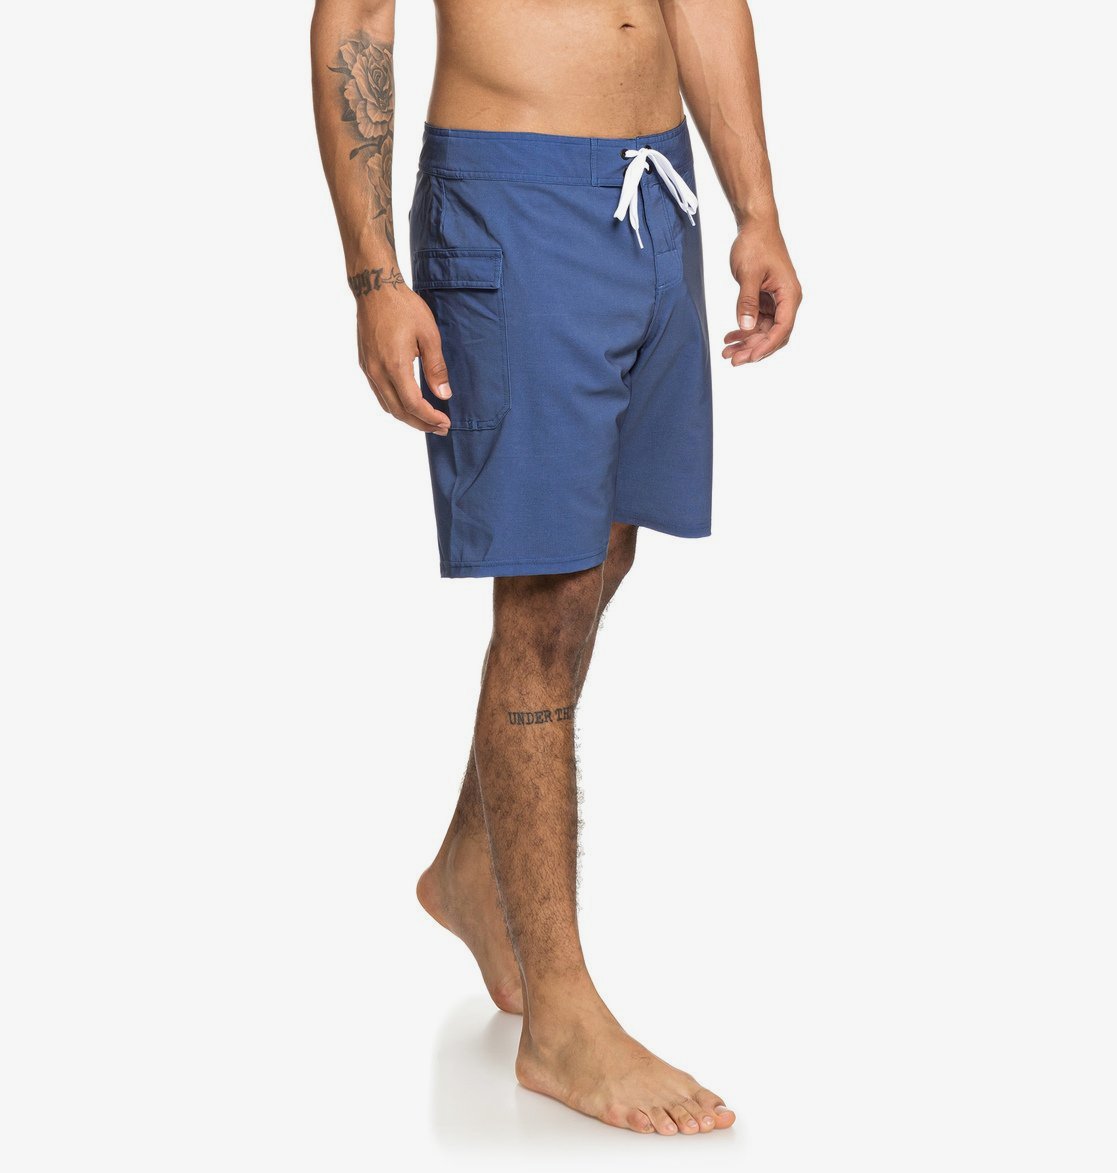 DC Shoes M Local Lopa 2 18 Boardshort 2019